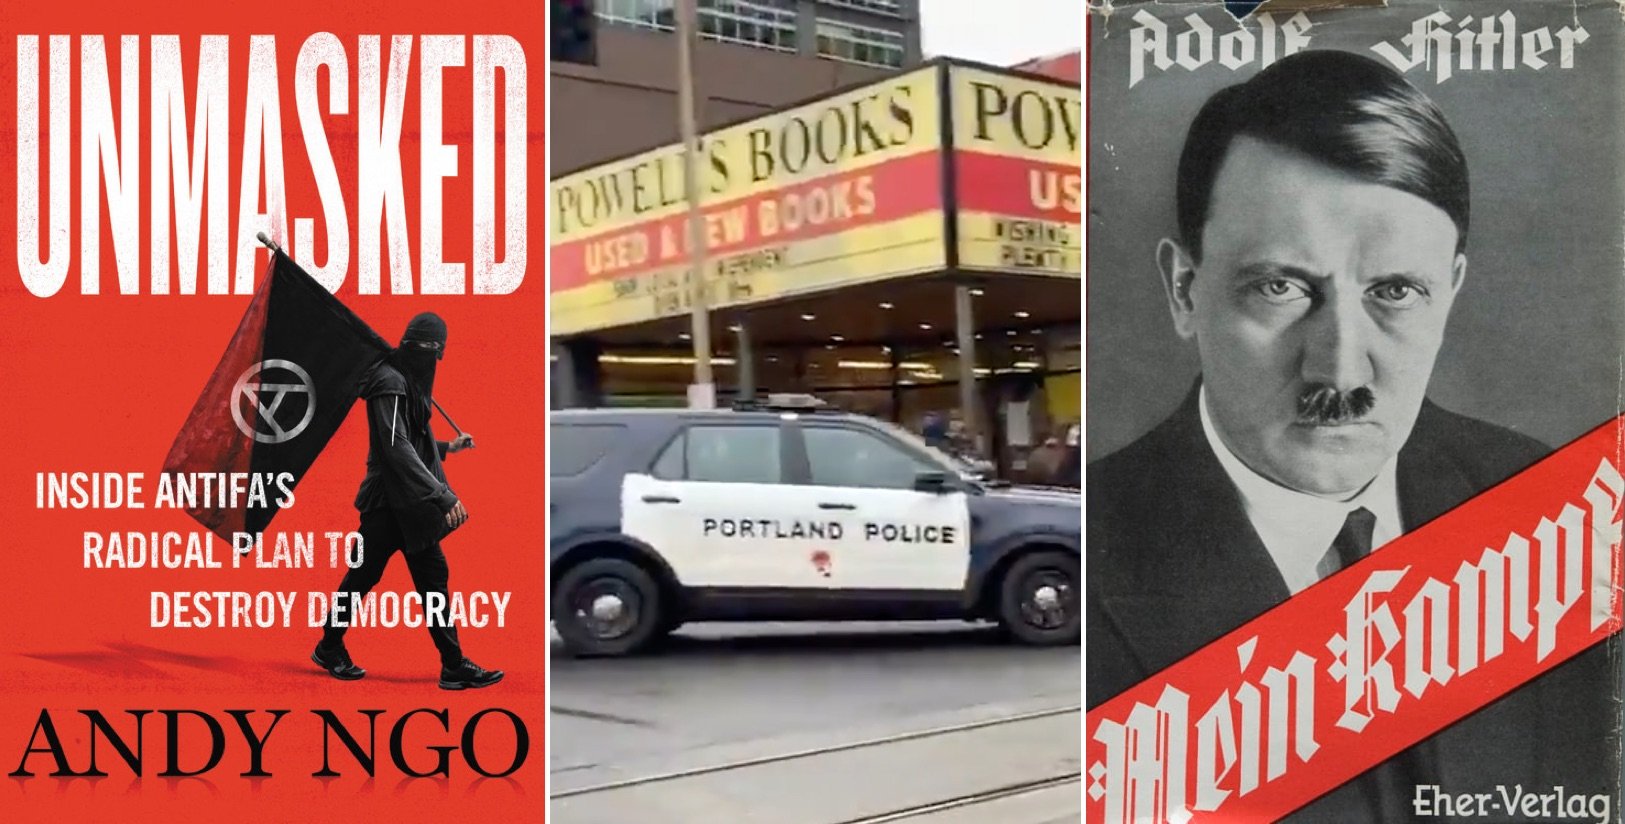  Antifa Bullies Powell’s Books Into Removing Andy Ngo’s Book; Still Sells 60+ Versions of Mein Kampf (VIDEO)